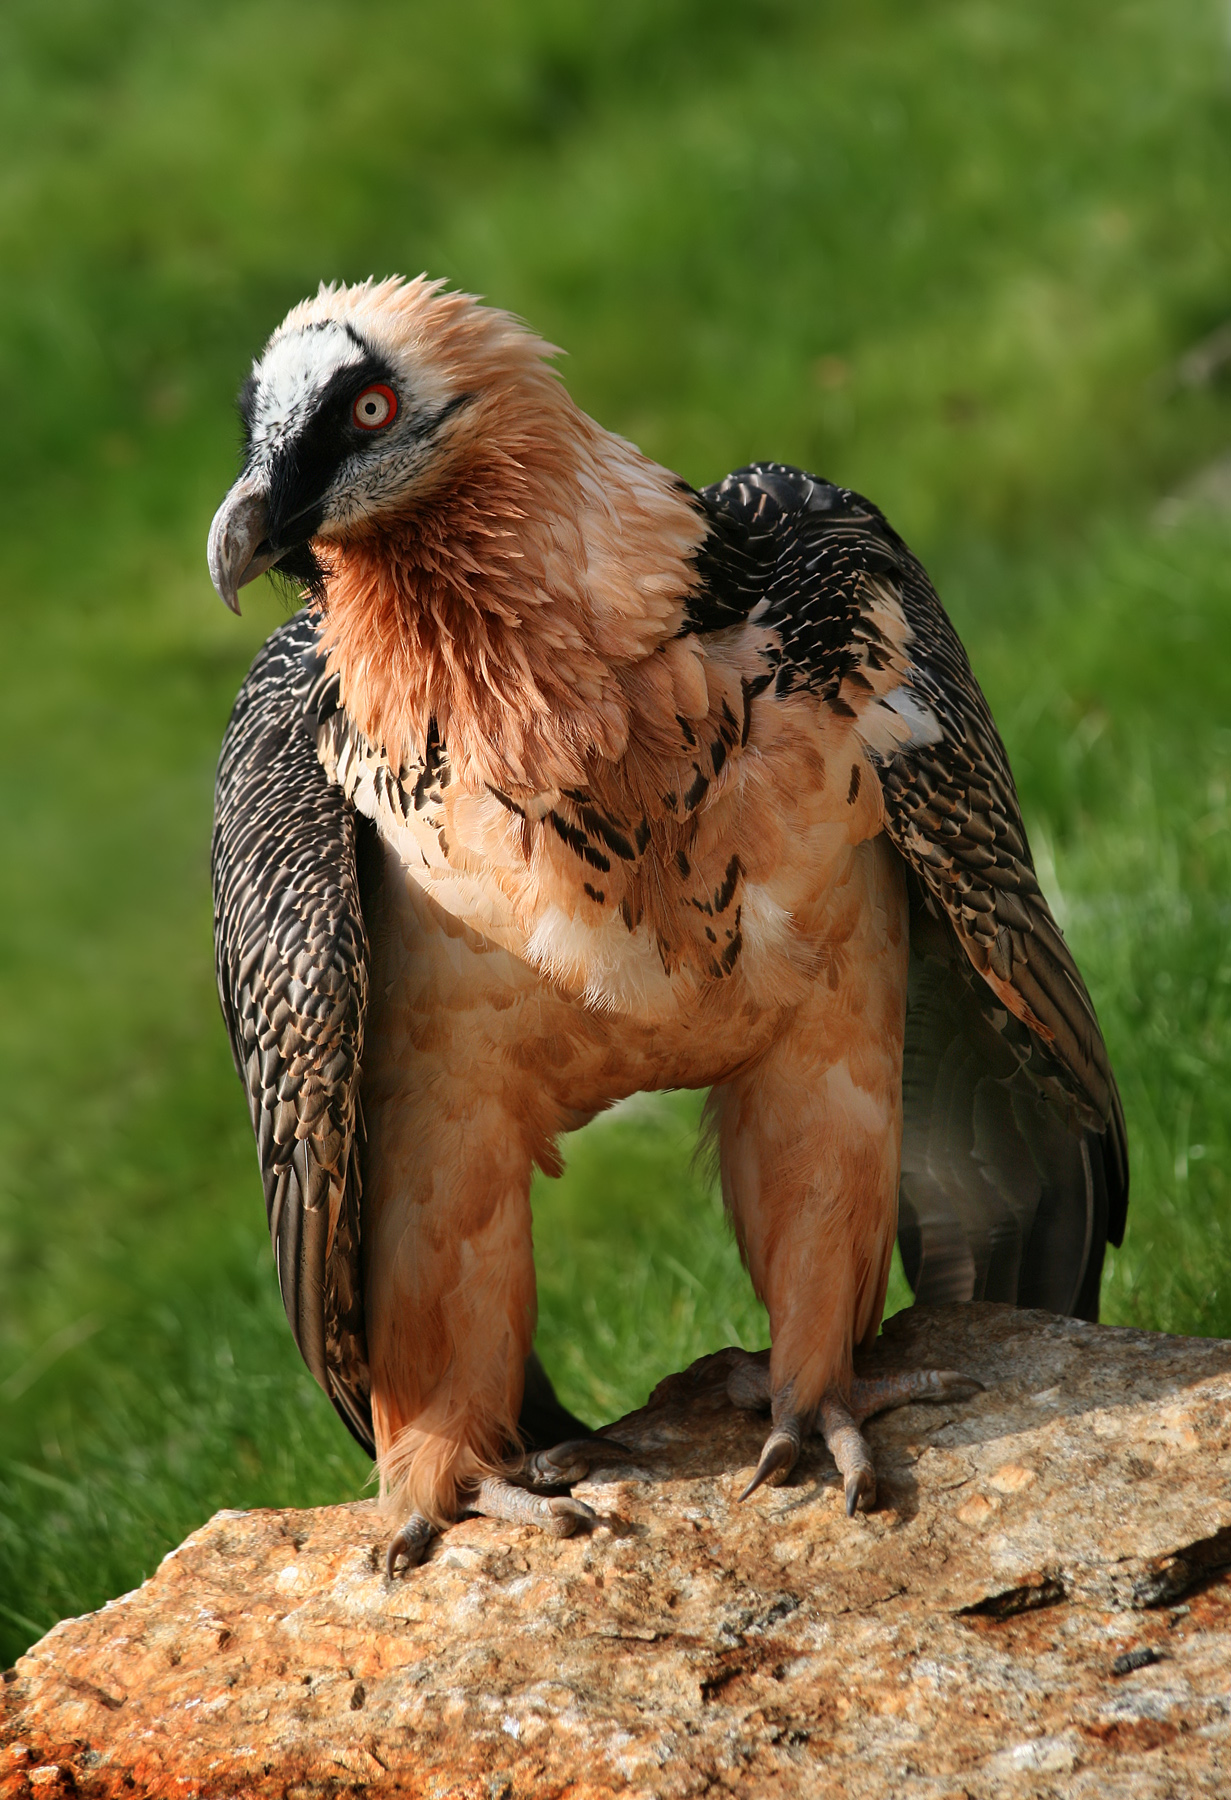 Why do bearded vultures drop bones from rocks?